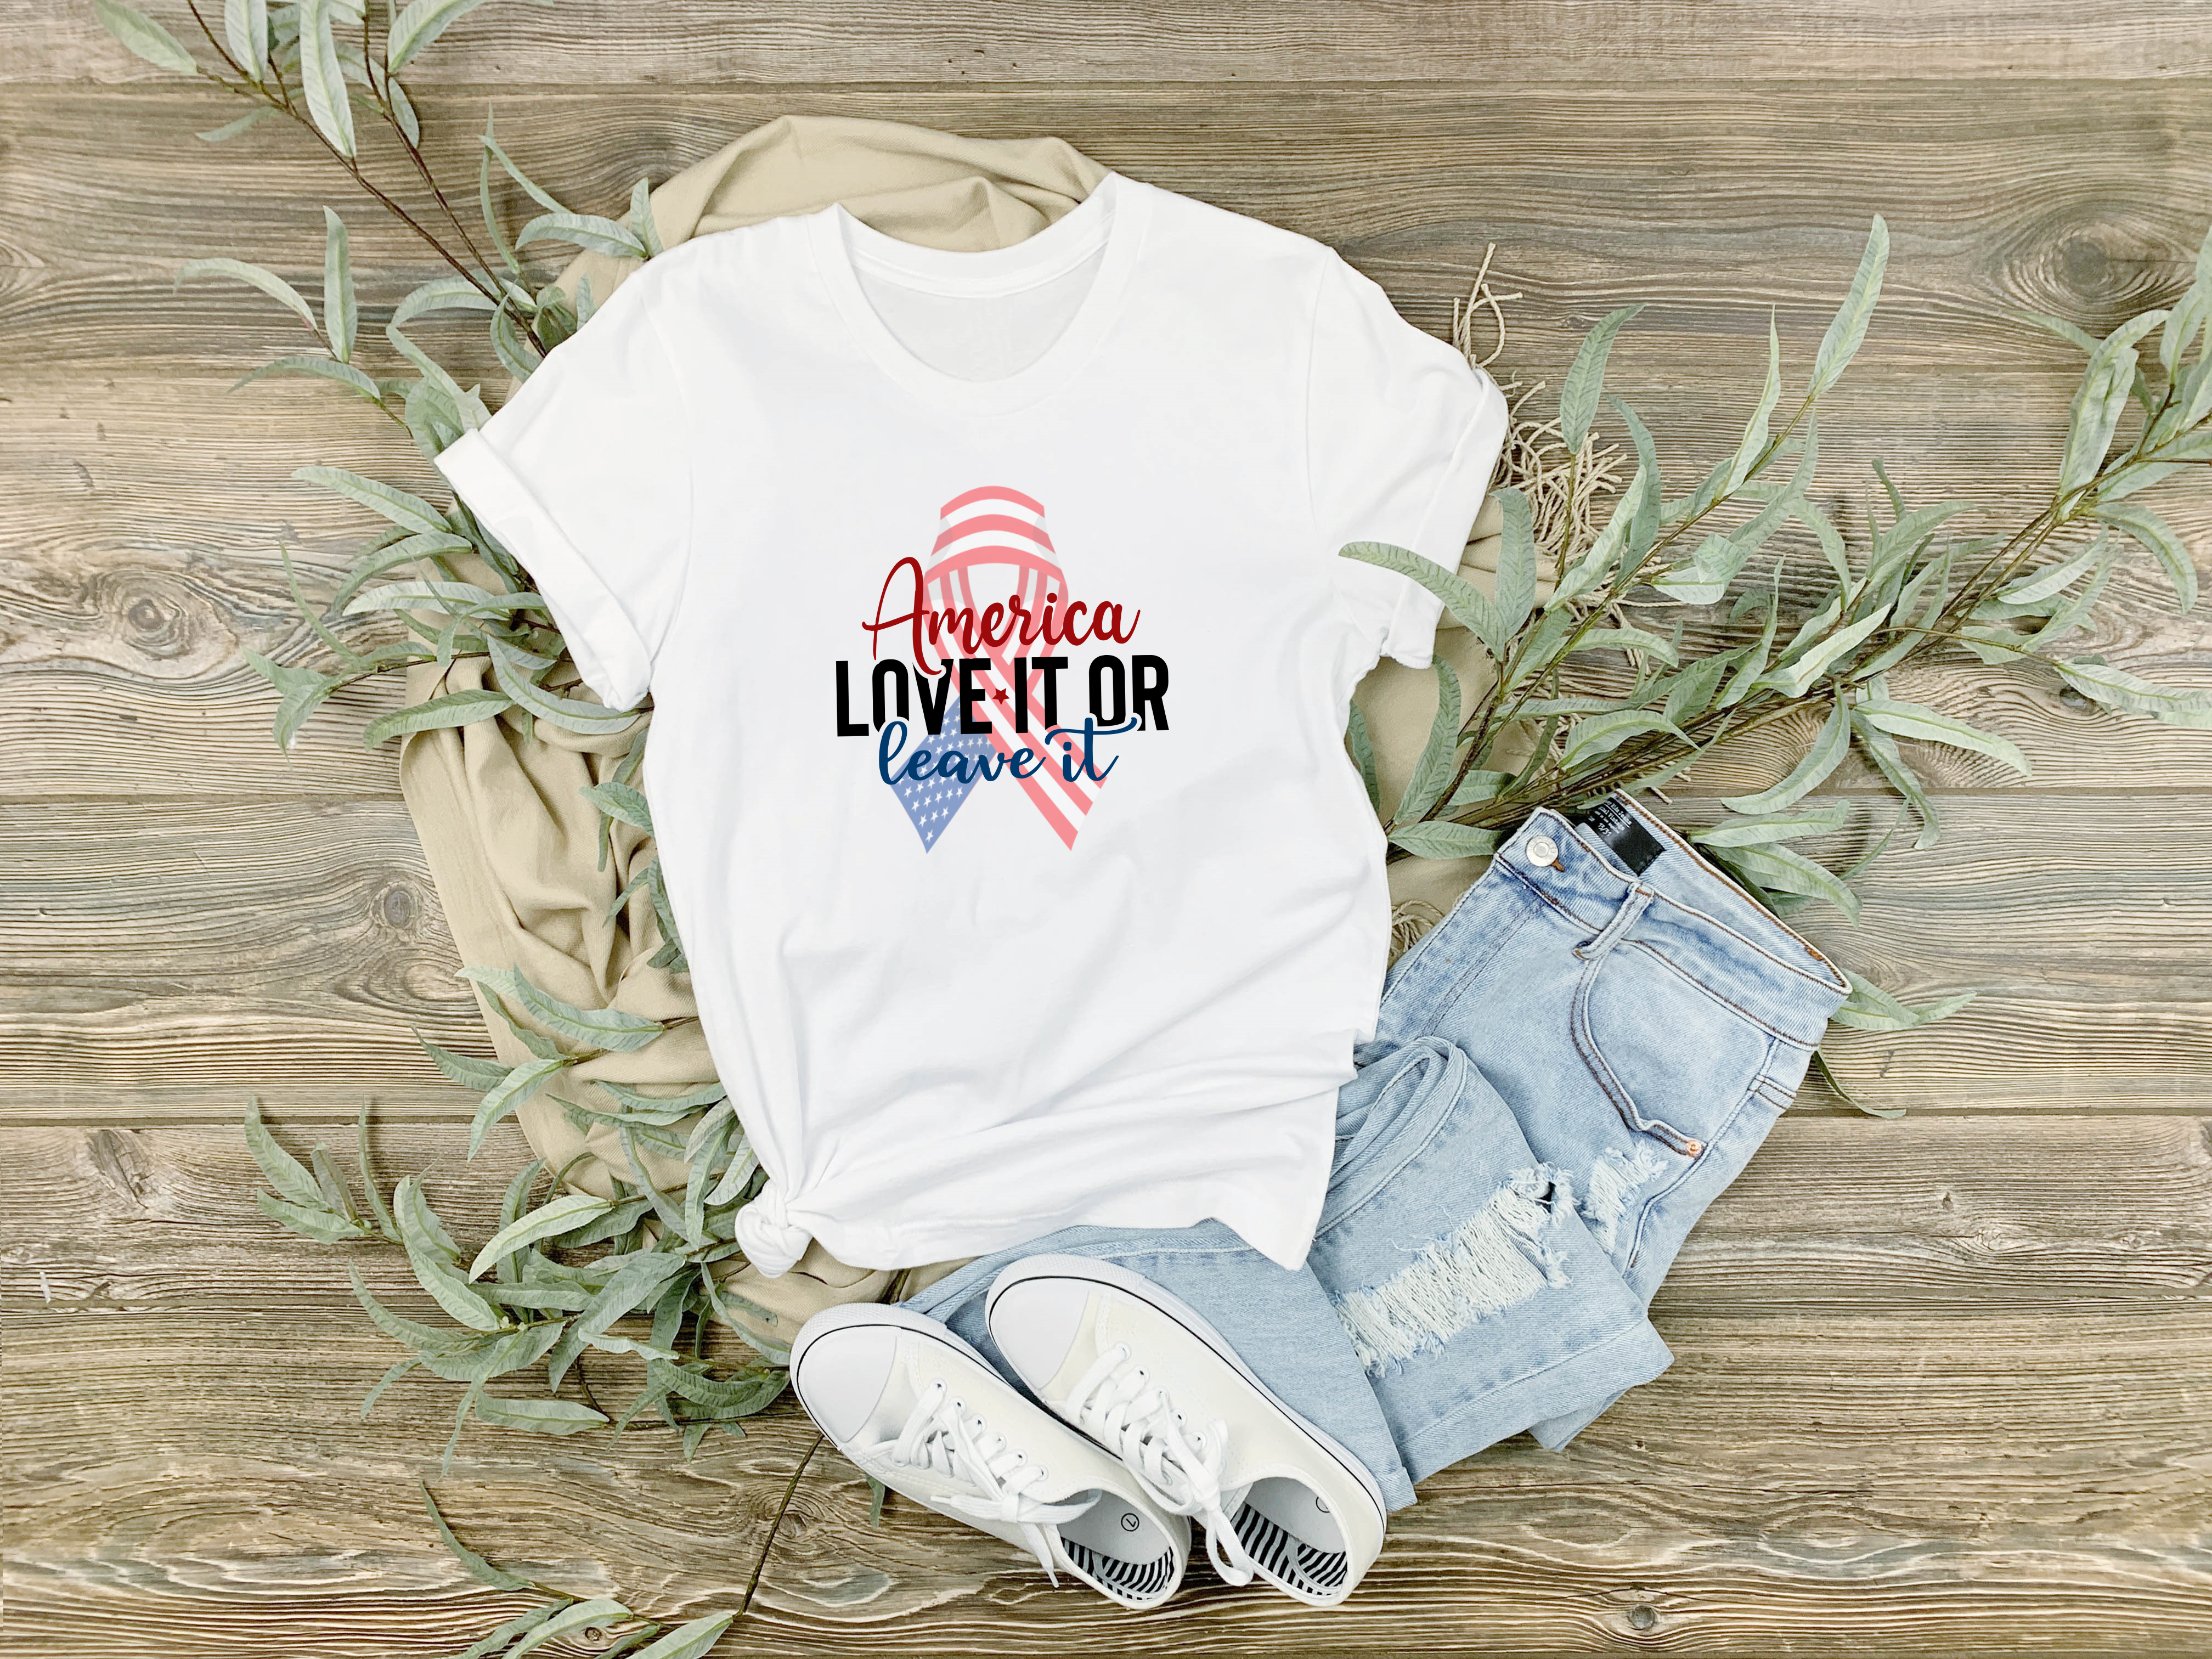 America Love It or Leave It T-shirt